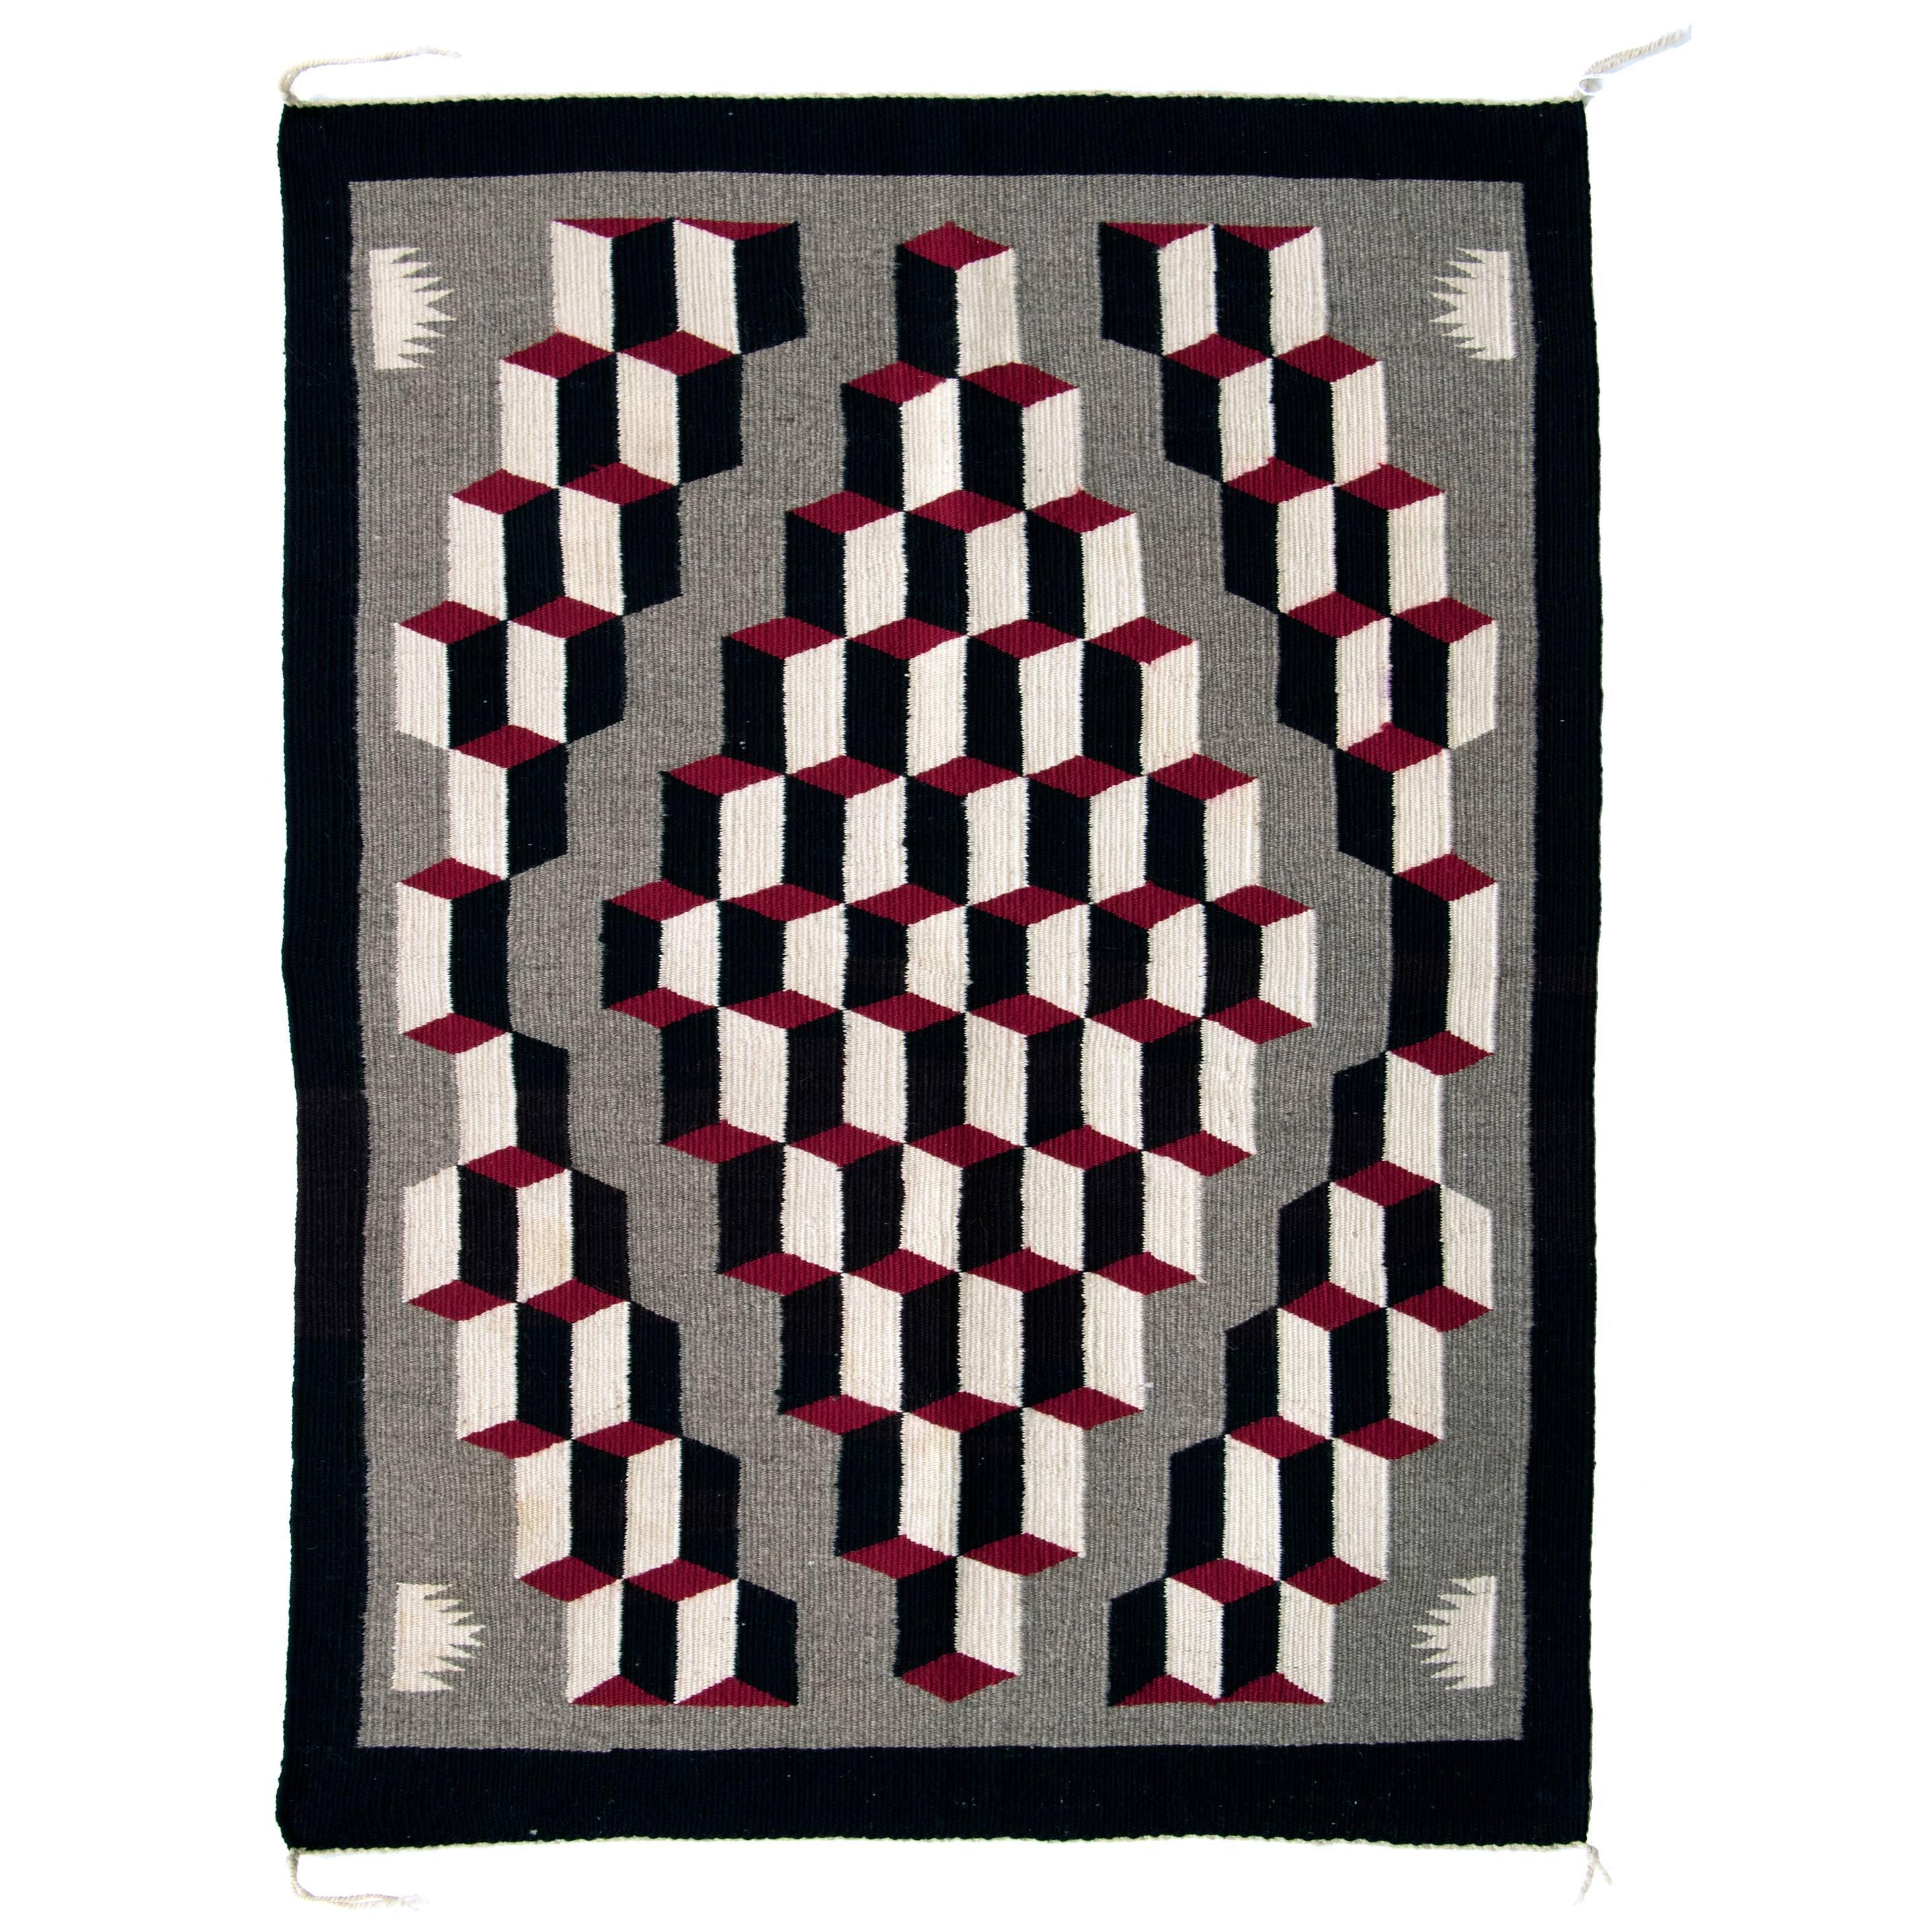 Woven of native hand-spun wool in natural black, ivory and gray fleece with aniline dyed red. The striking composition is referred to as an Optical or Tumbling Block Pattern

This piece is well suited for use as an area rug, wall hanging or